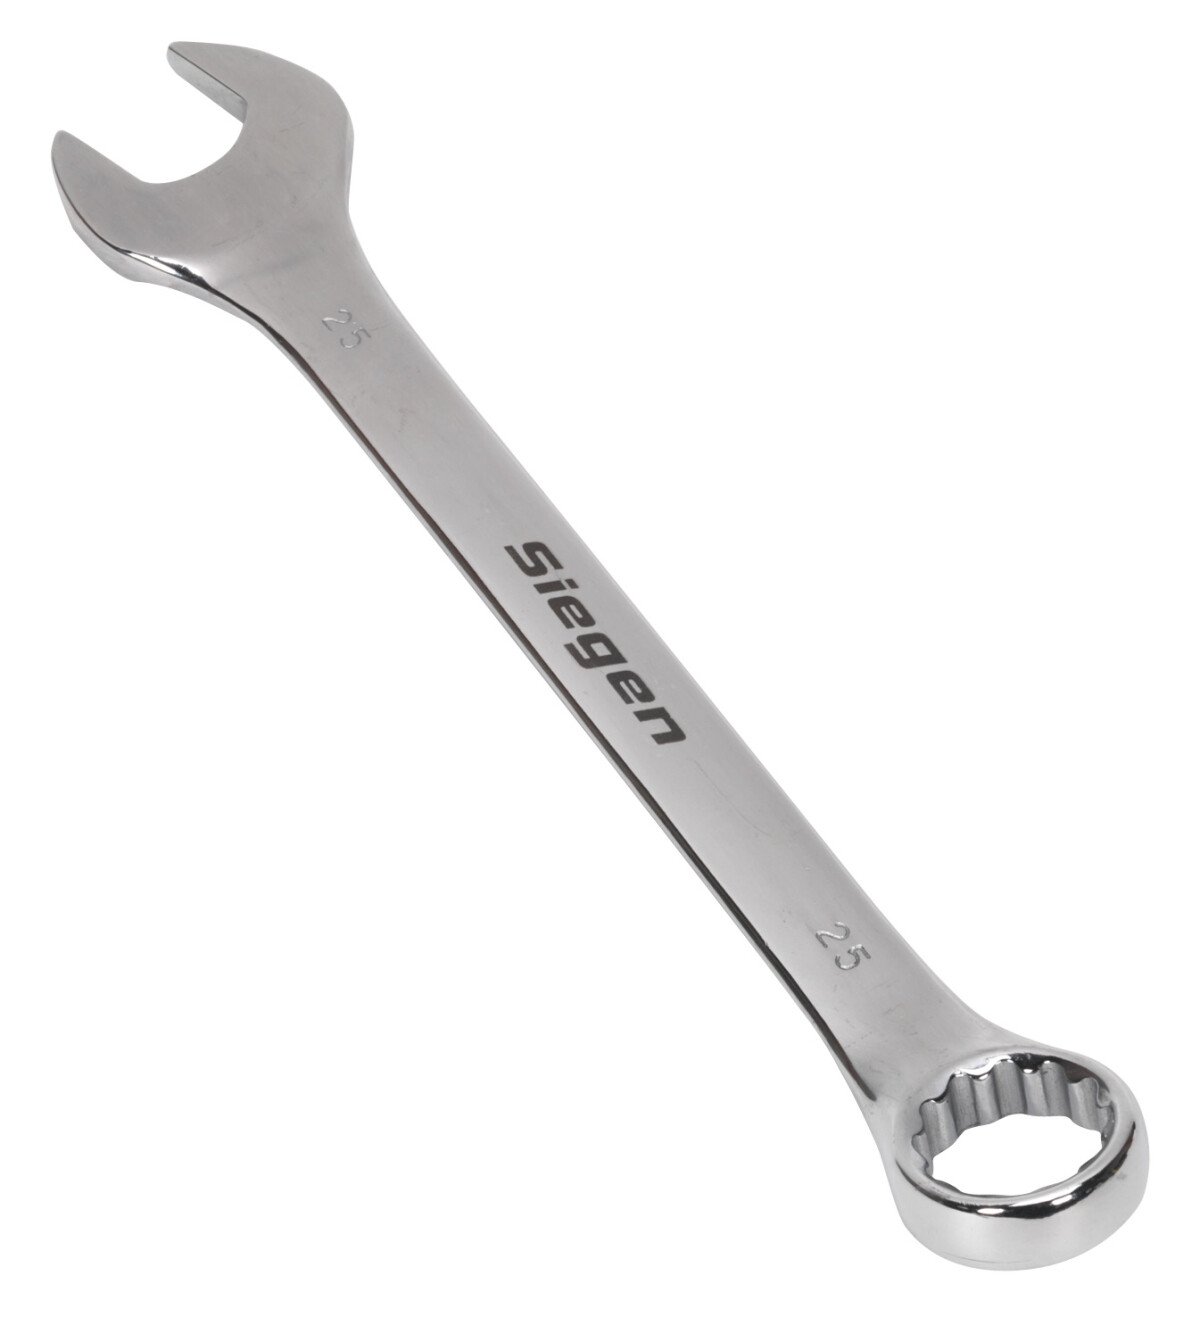 Sealey S01025 Combination Spanner 25mm